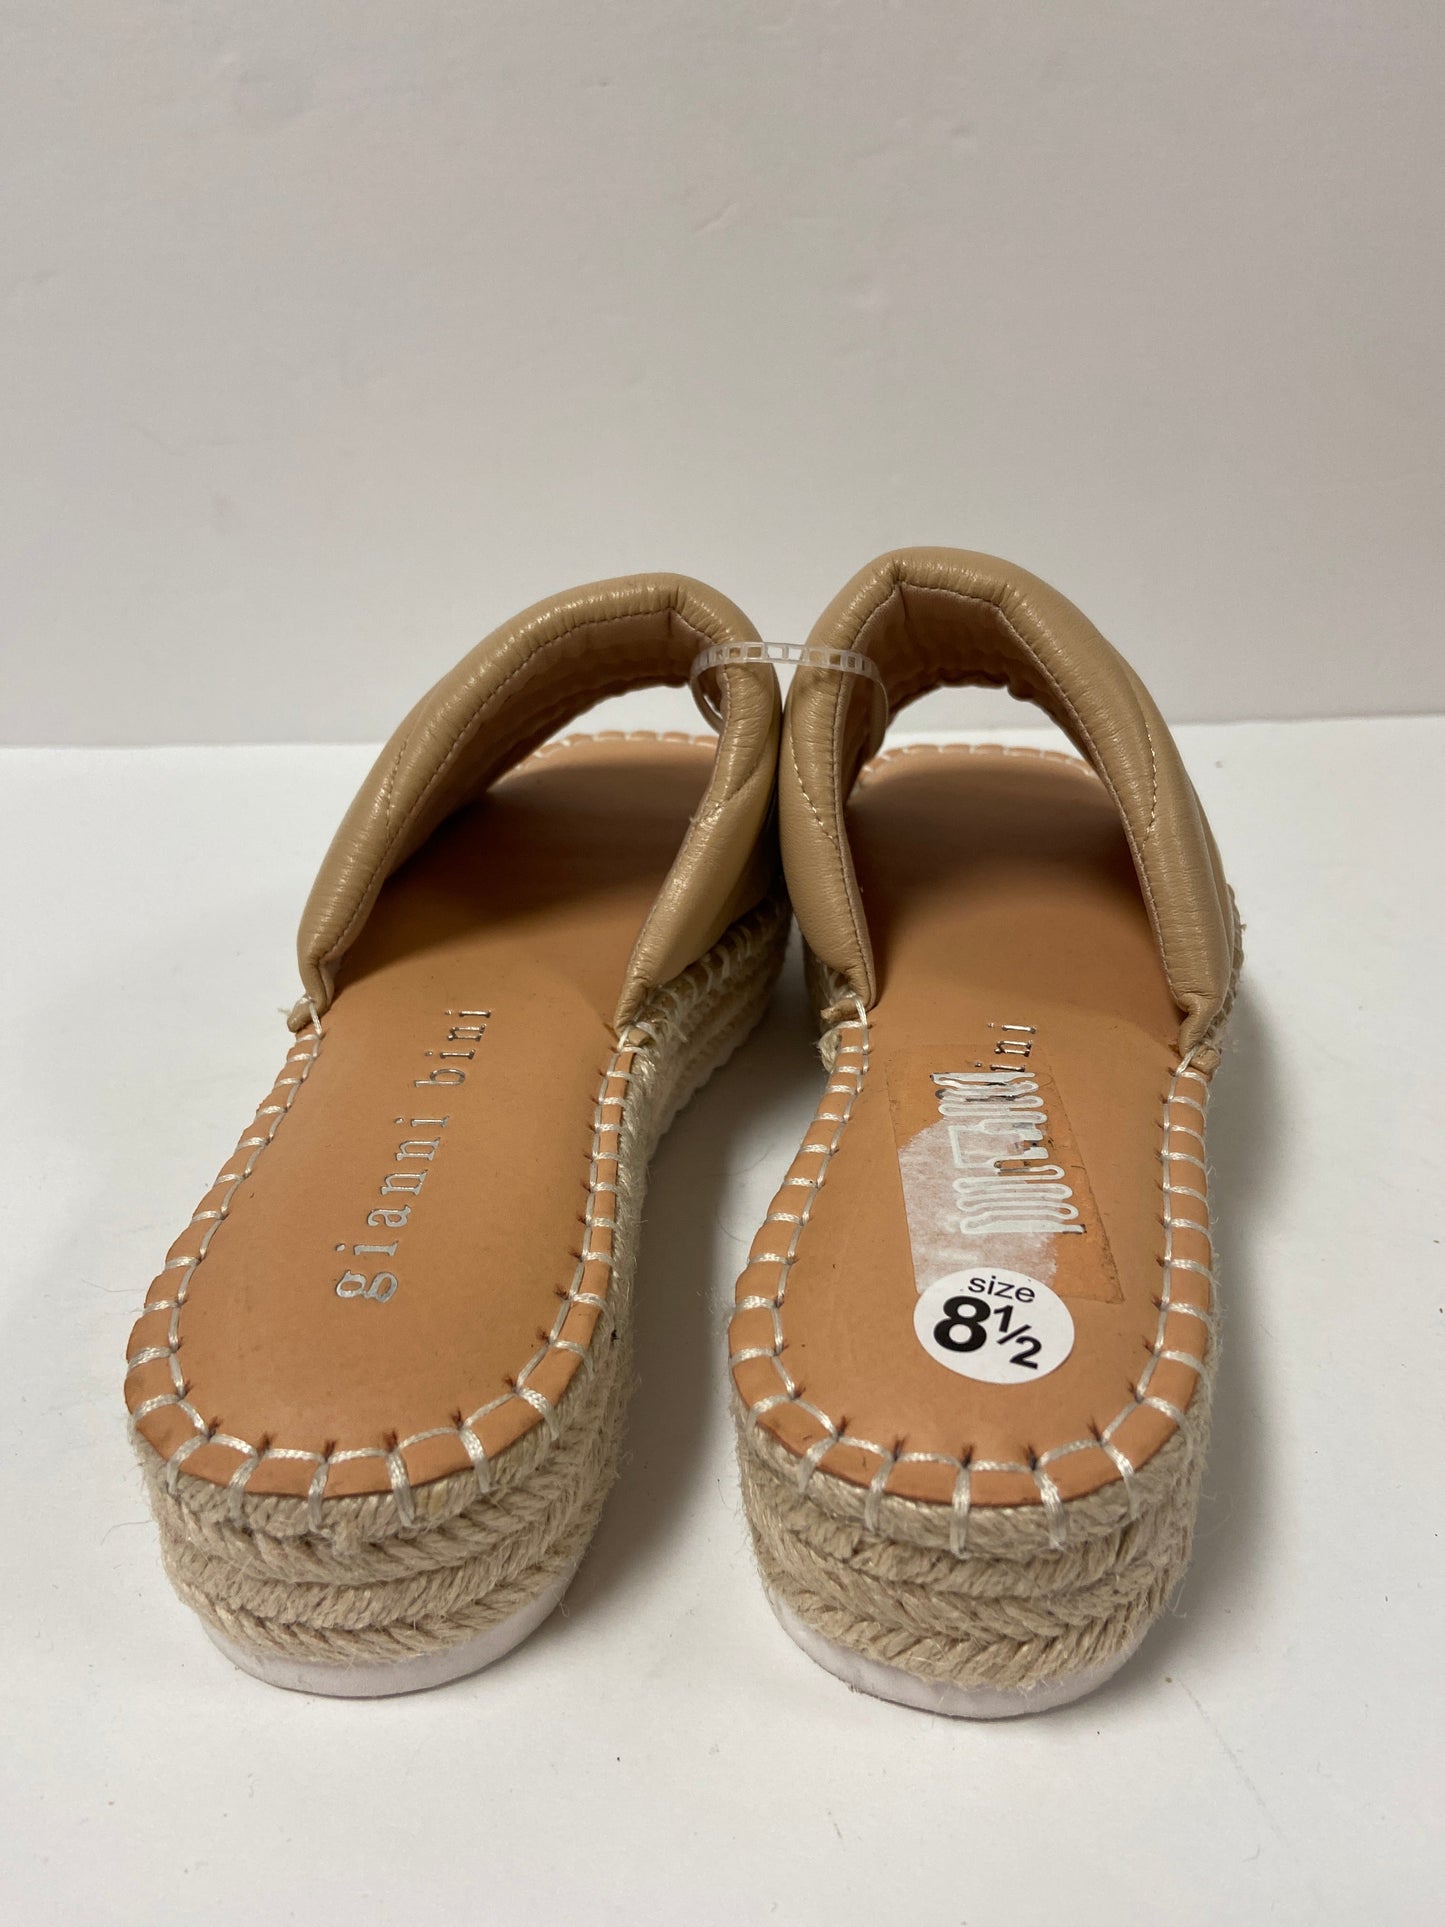 Shoes Flats Espadrille By Gianni Bini  Size: 8.5